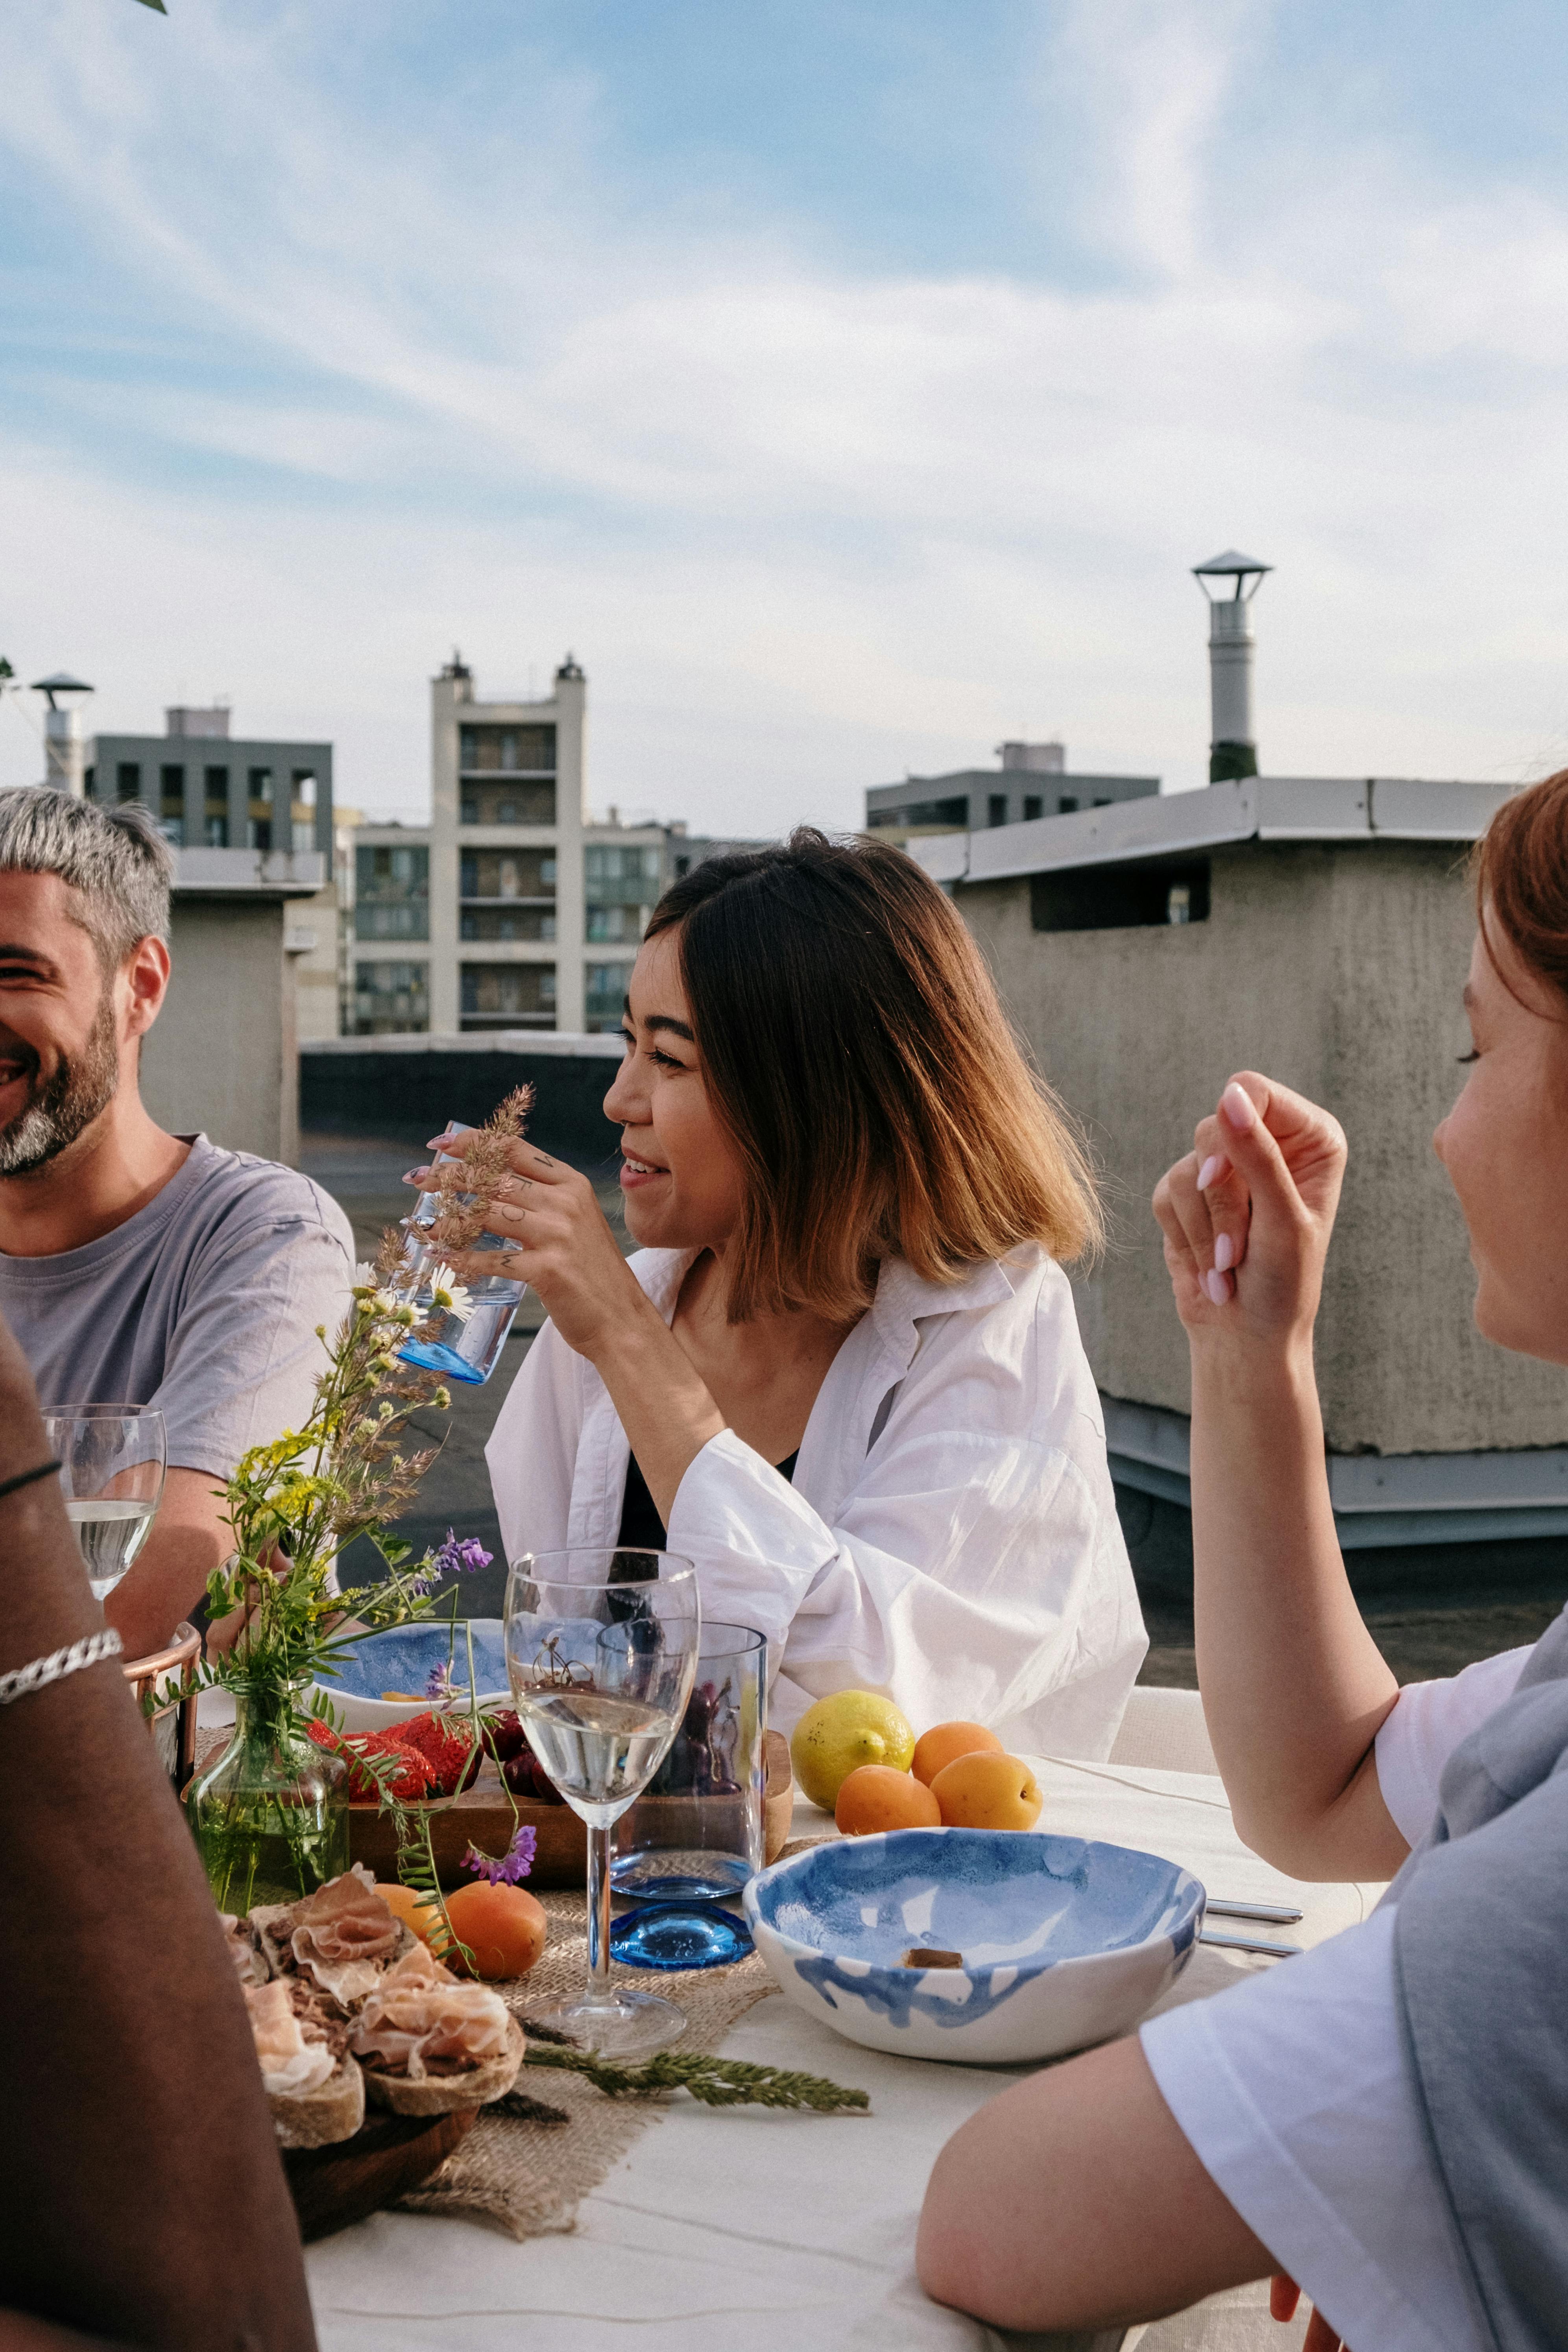 People talking and laughing at a table full of food | Source: Pexels